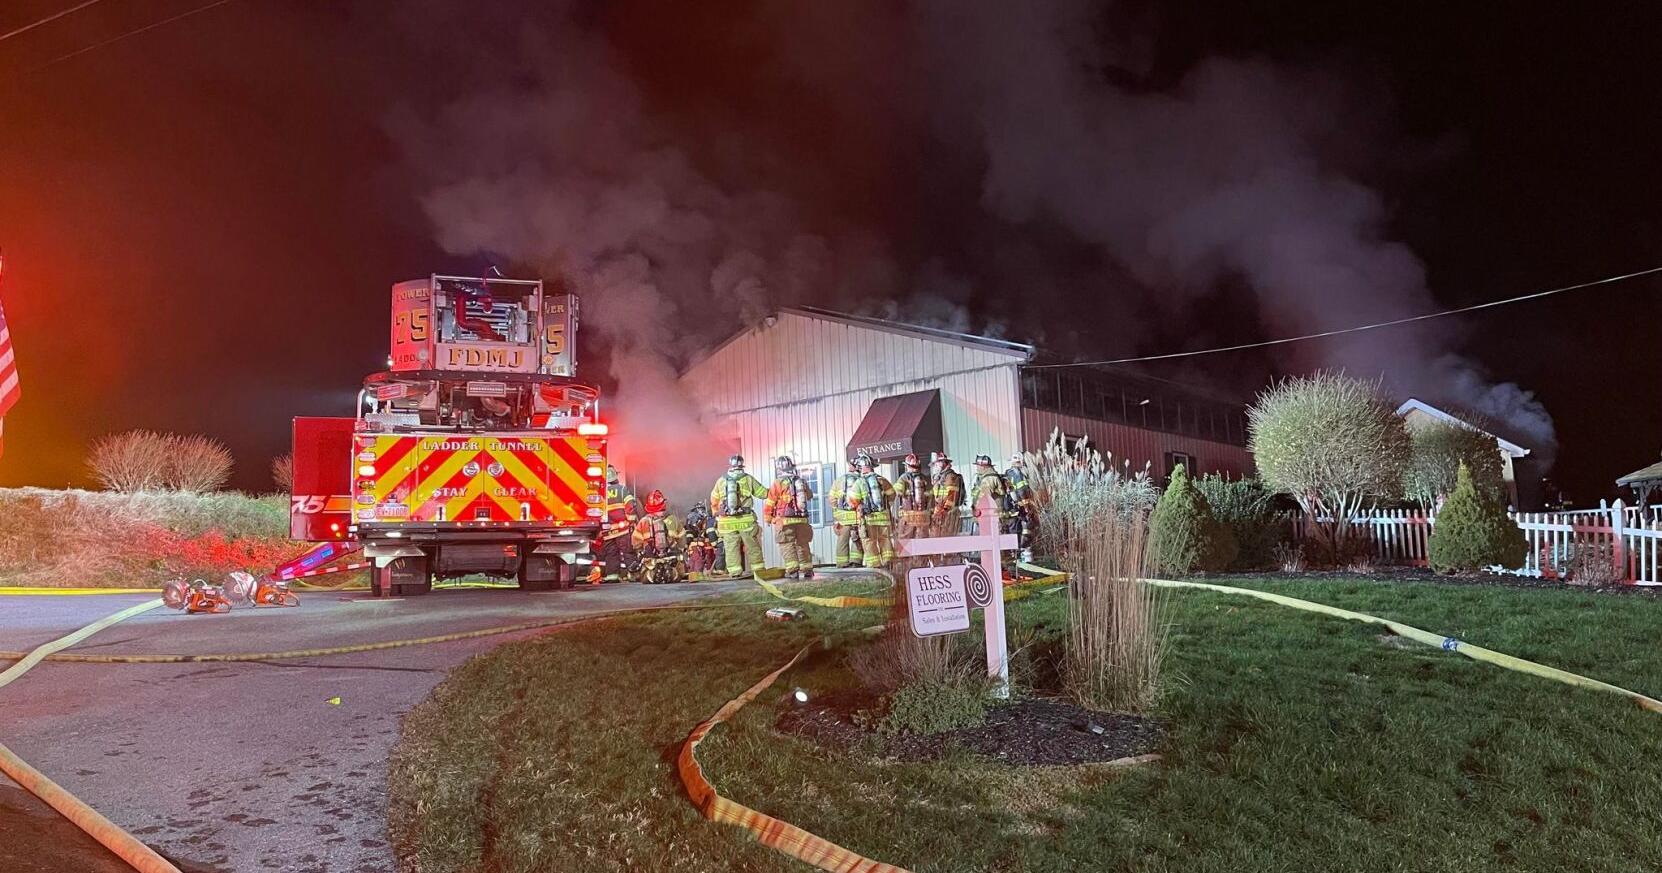 Crews respond to fire at Hess Flooring in Rapho Township Monday night [update]